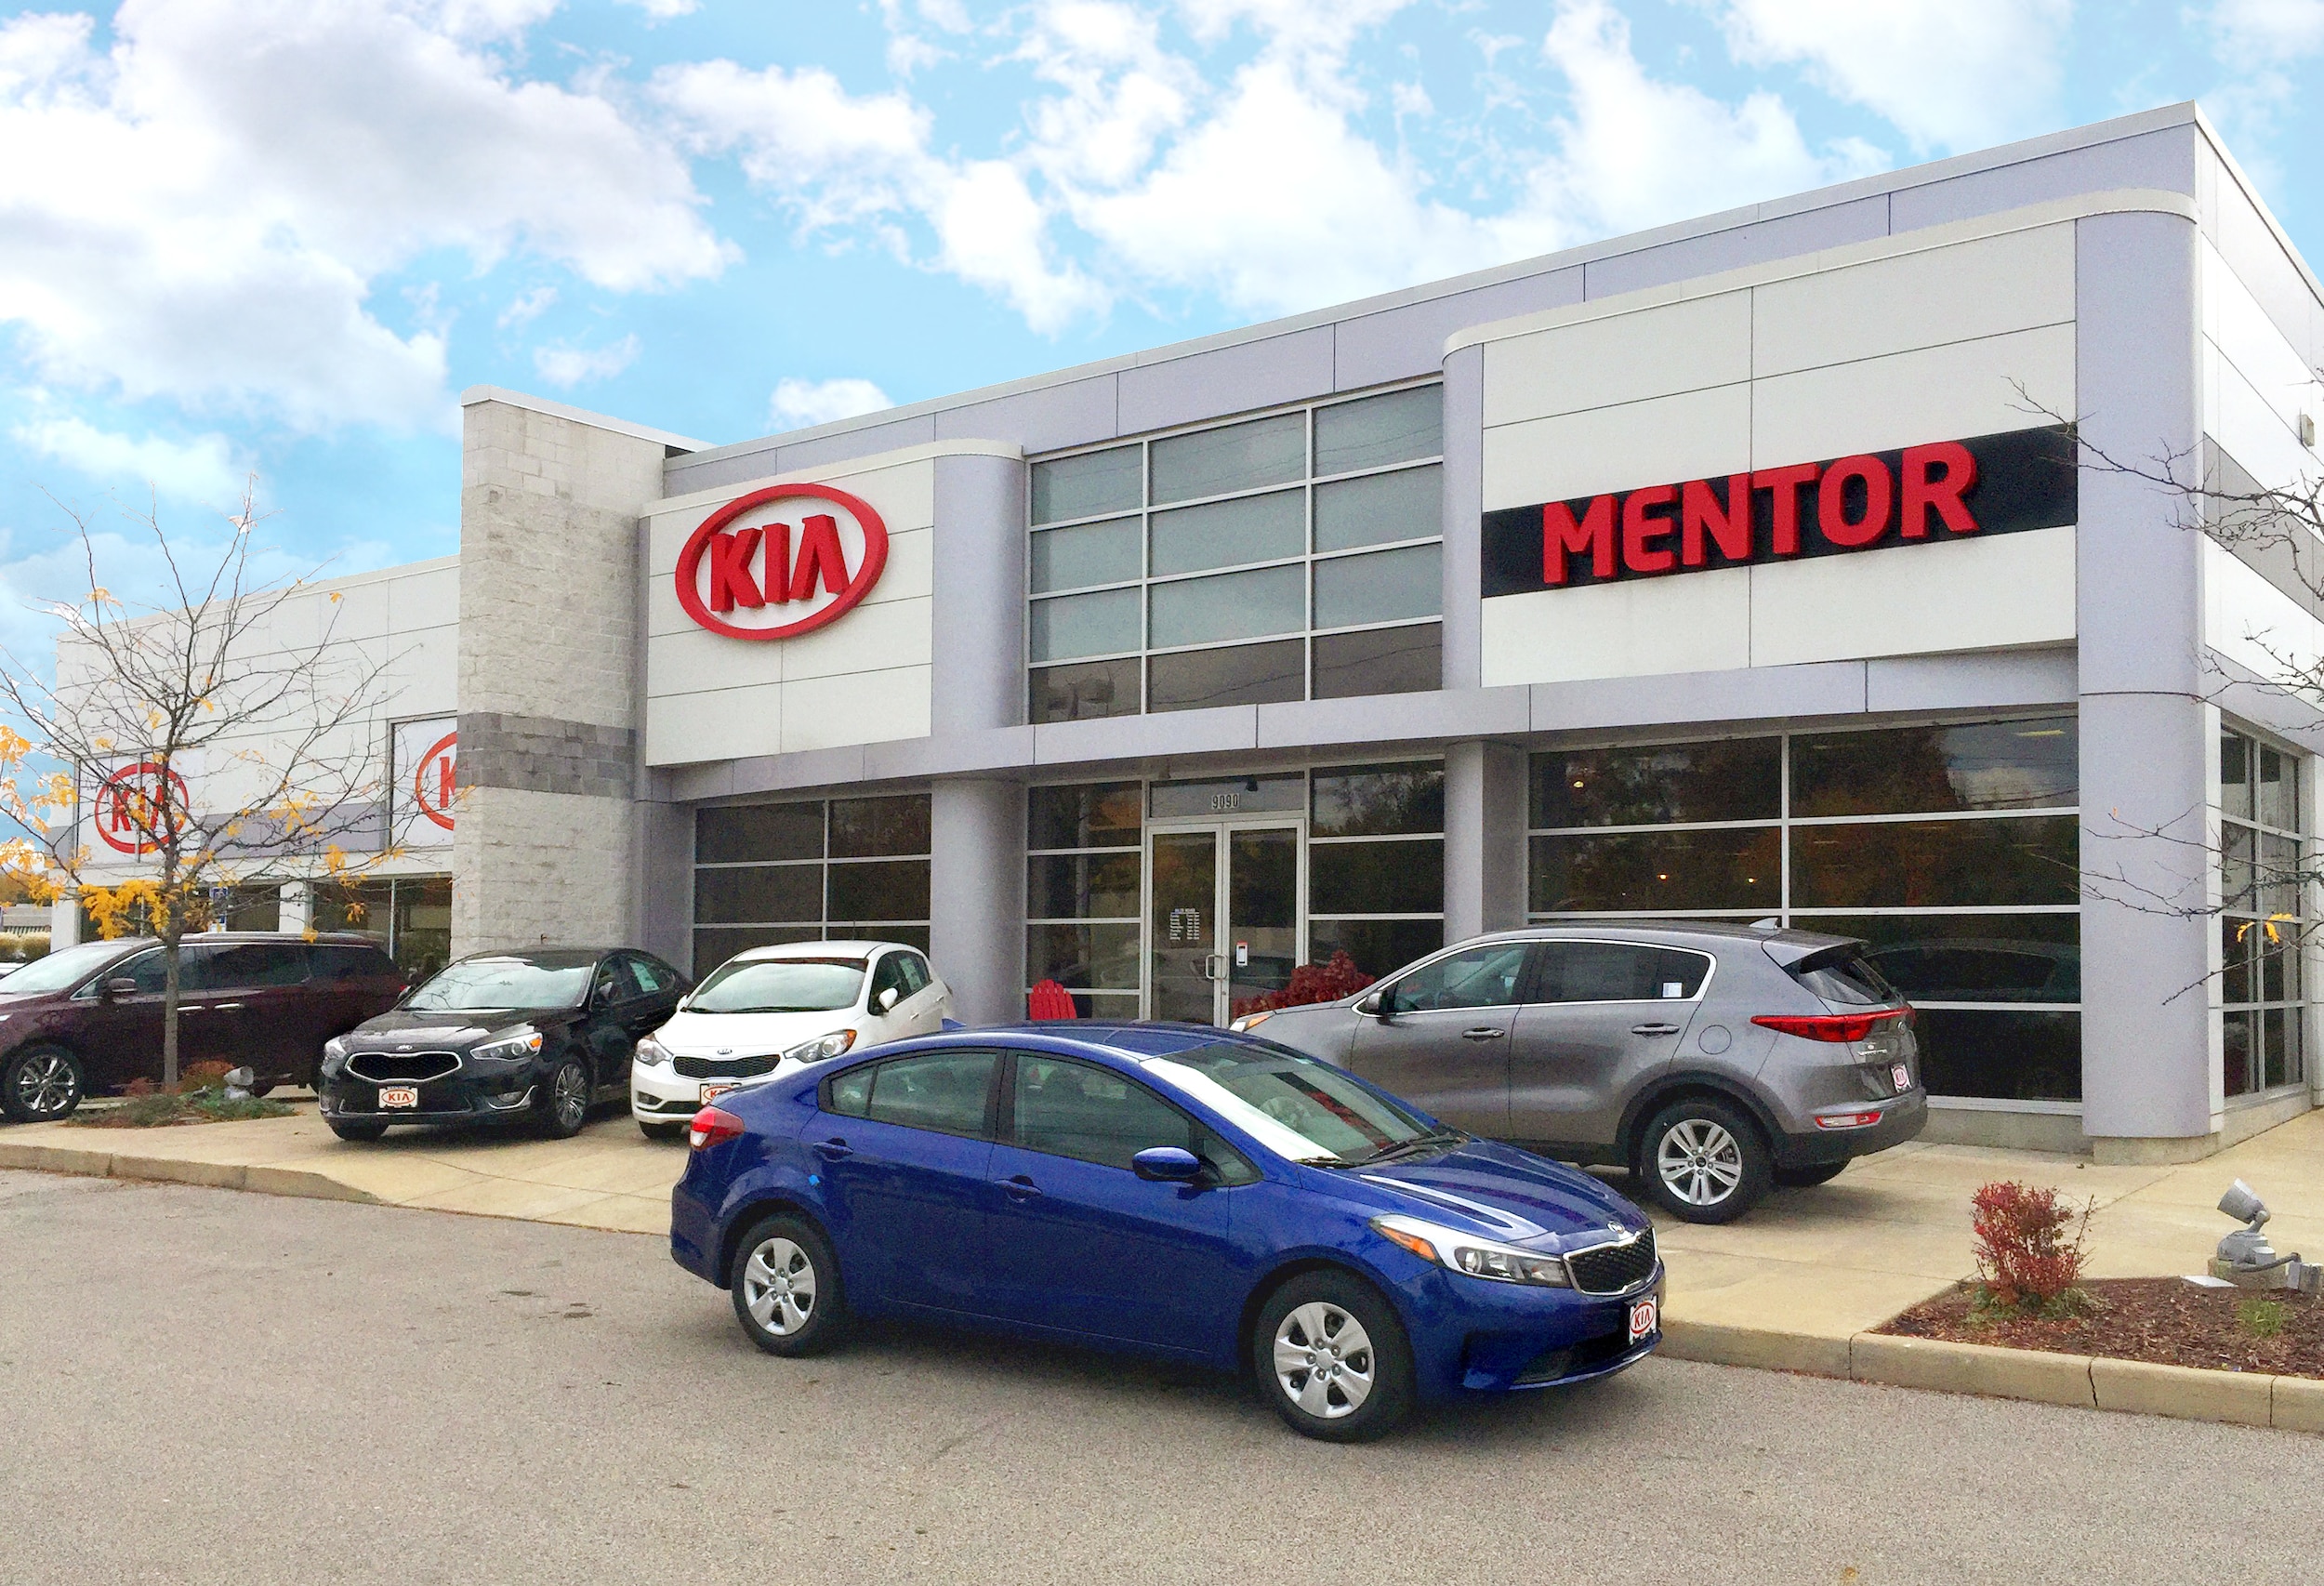 Directions to Our Dealership Mentor Kia